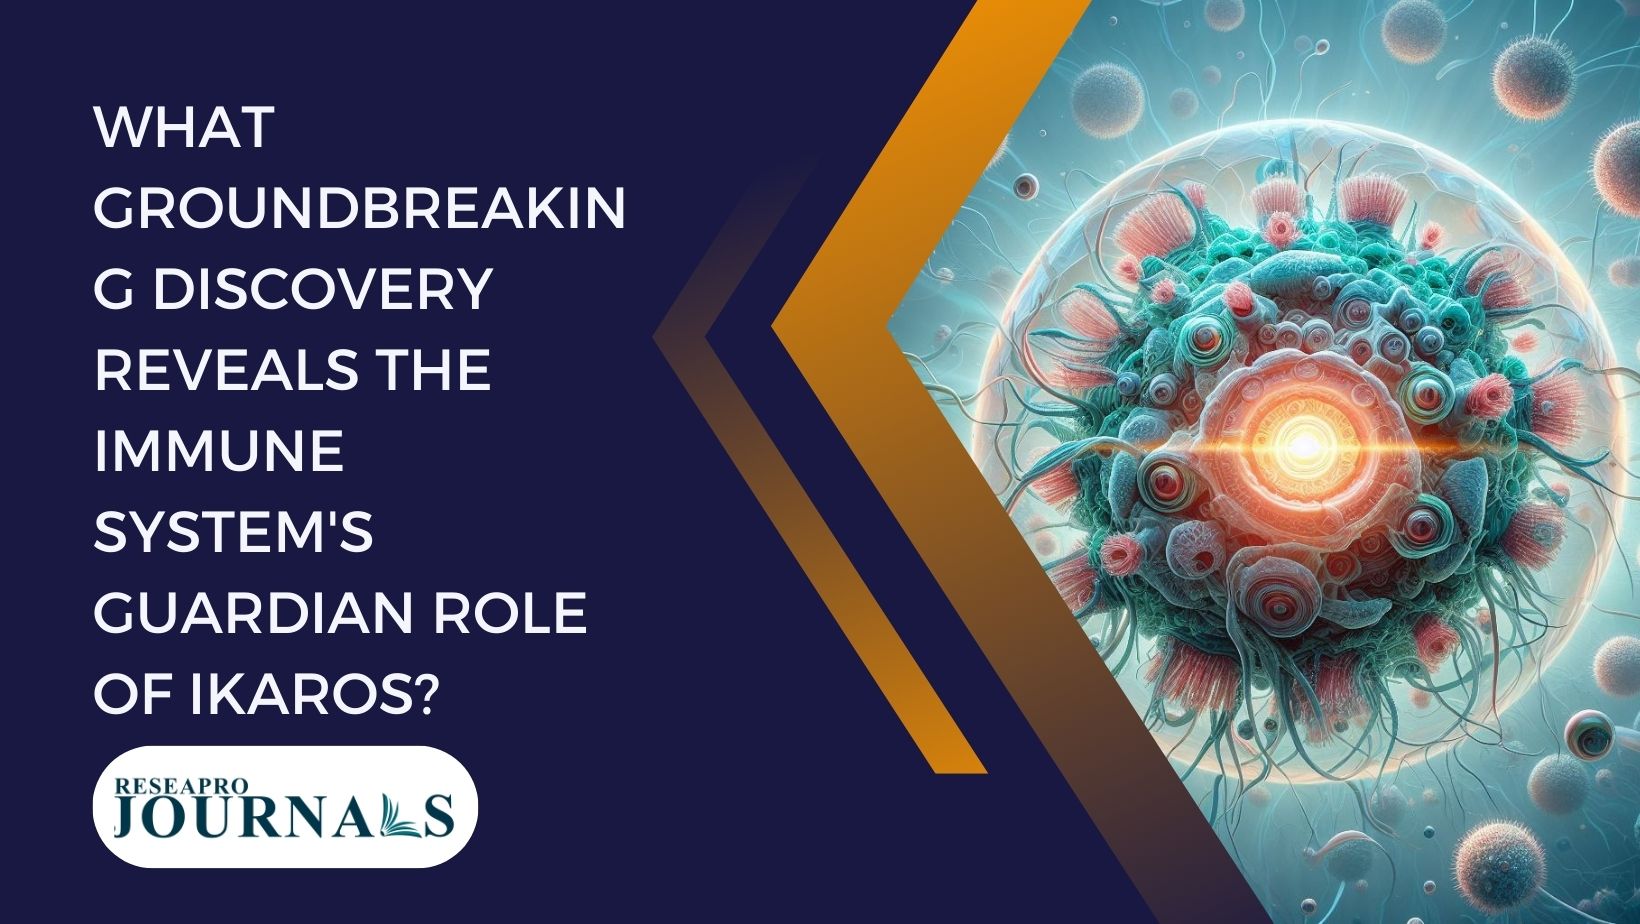 IKAROS: A newfound guardian shaping immune responses for medical breakthroughs.